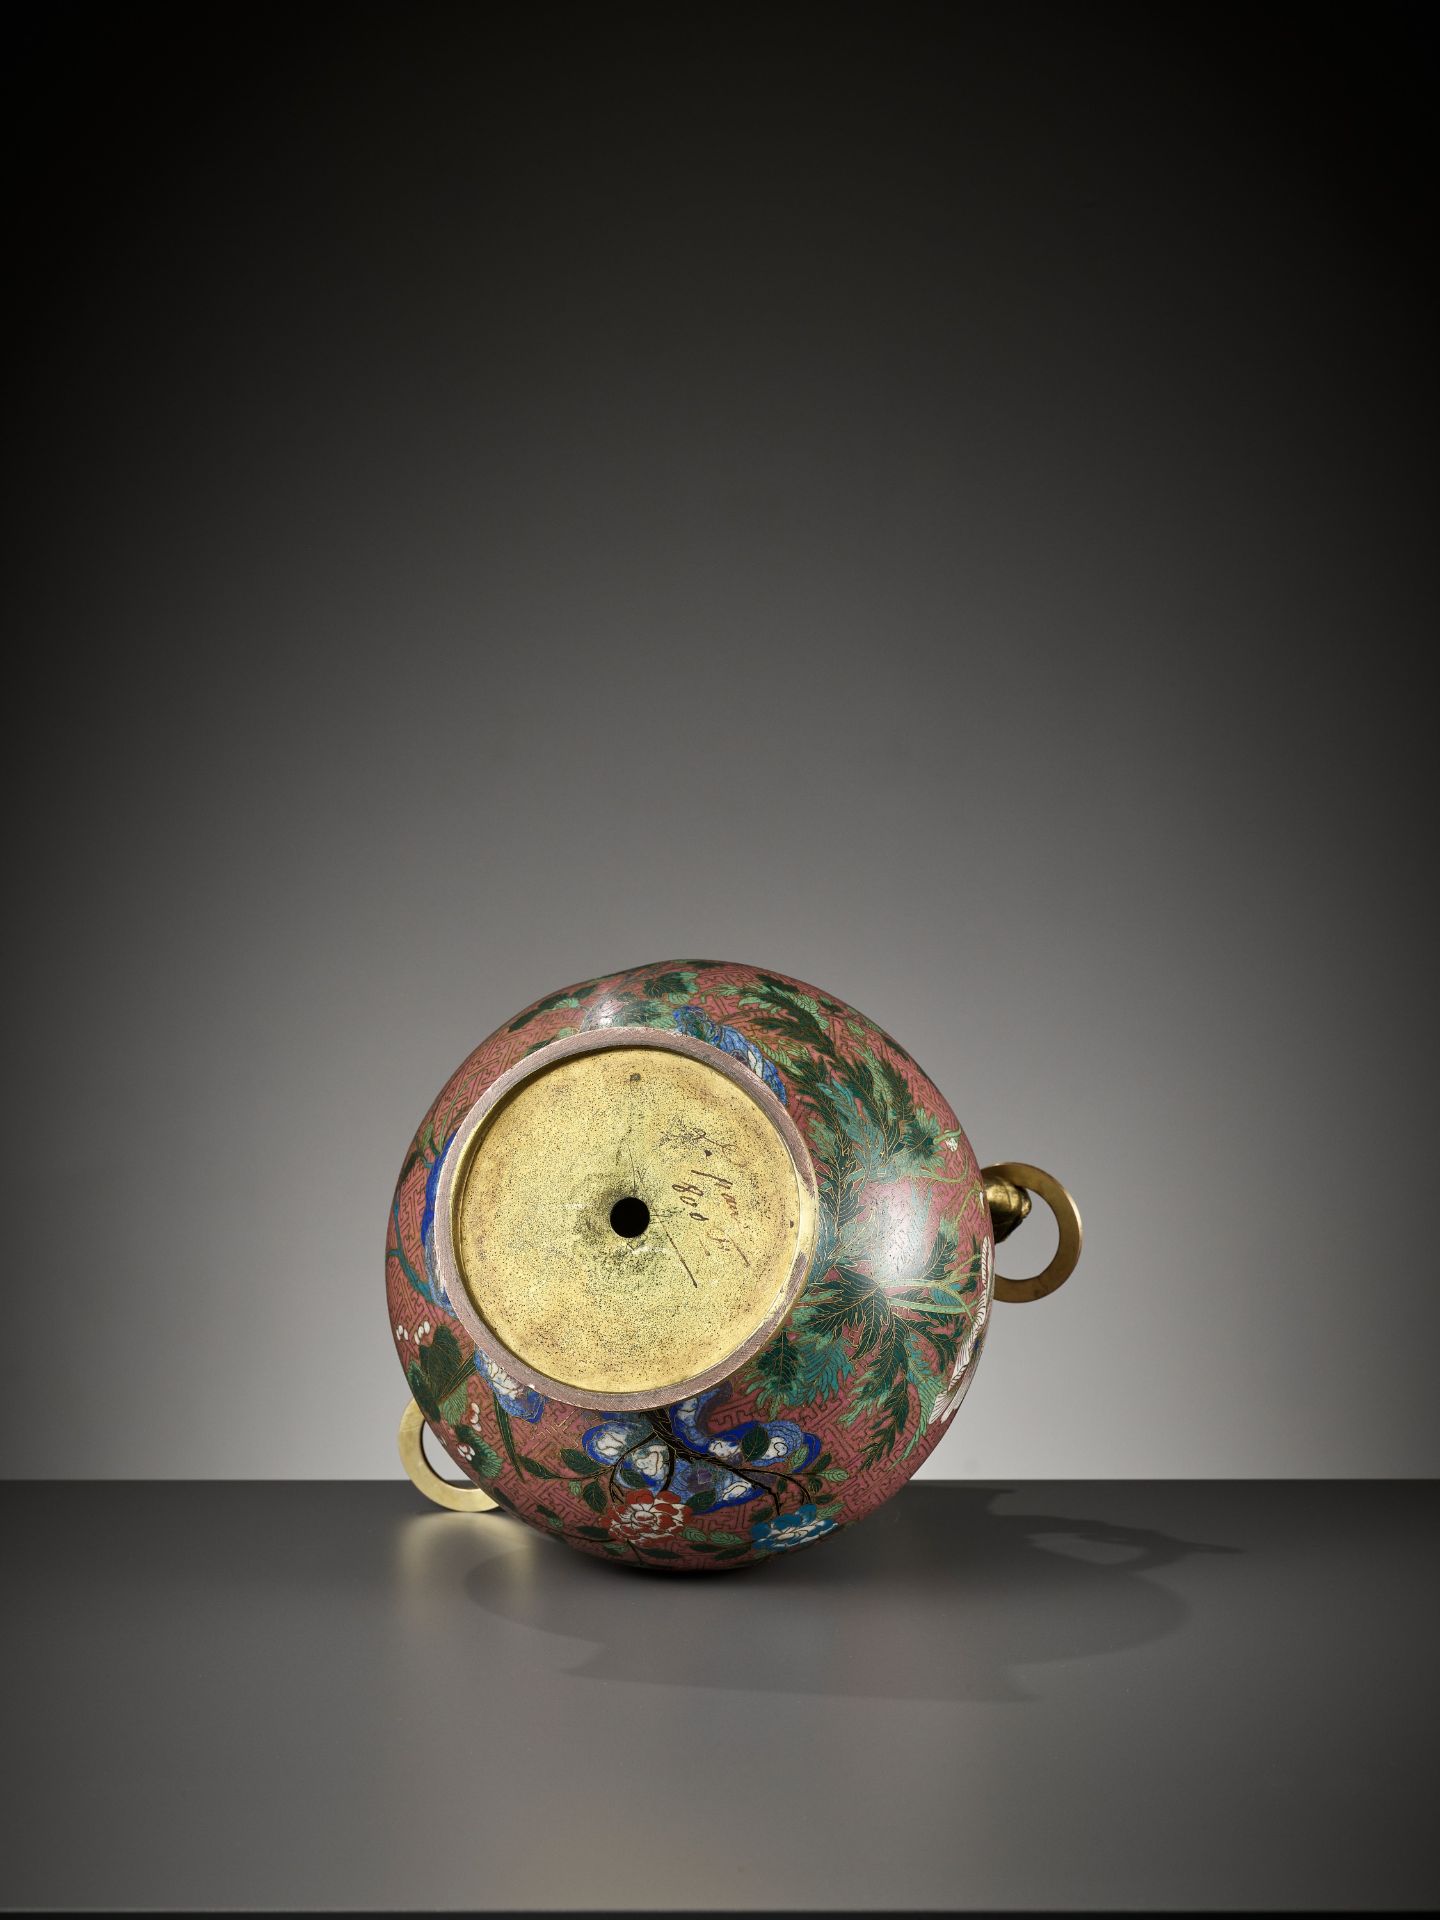 A GILT-BRONZE AND CLOISONNE ENAMEL 'CRICKET' VASE, HU, JIAQING PERIOD - Image 13 of 14